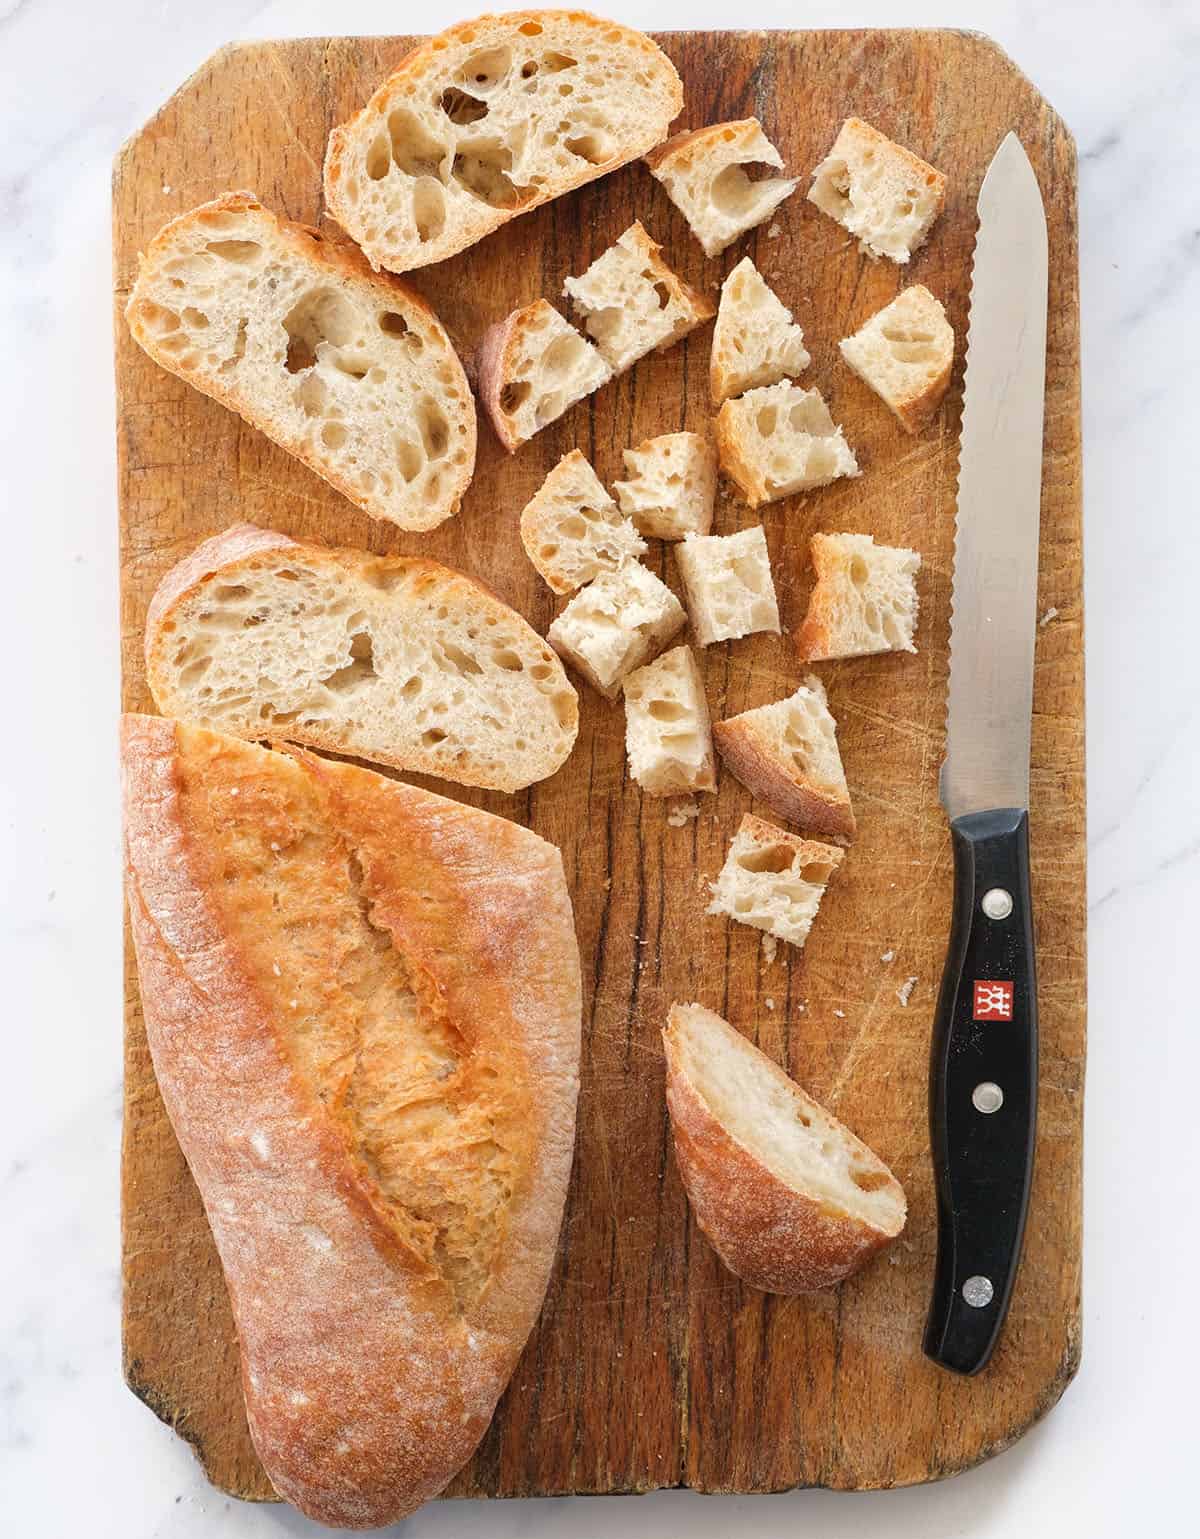 Top view of a wooden chopping board with rustic ciabatta bread cut into cubes.